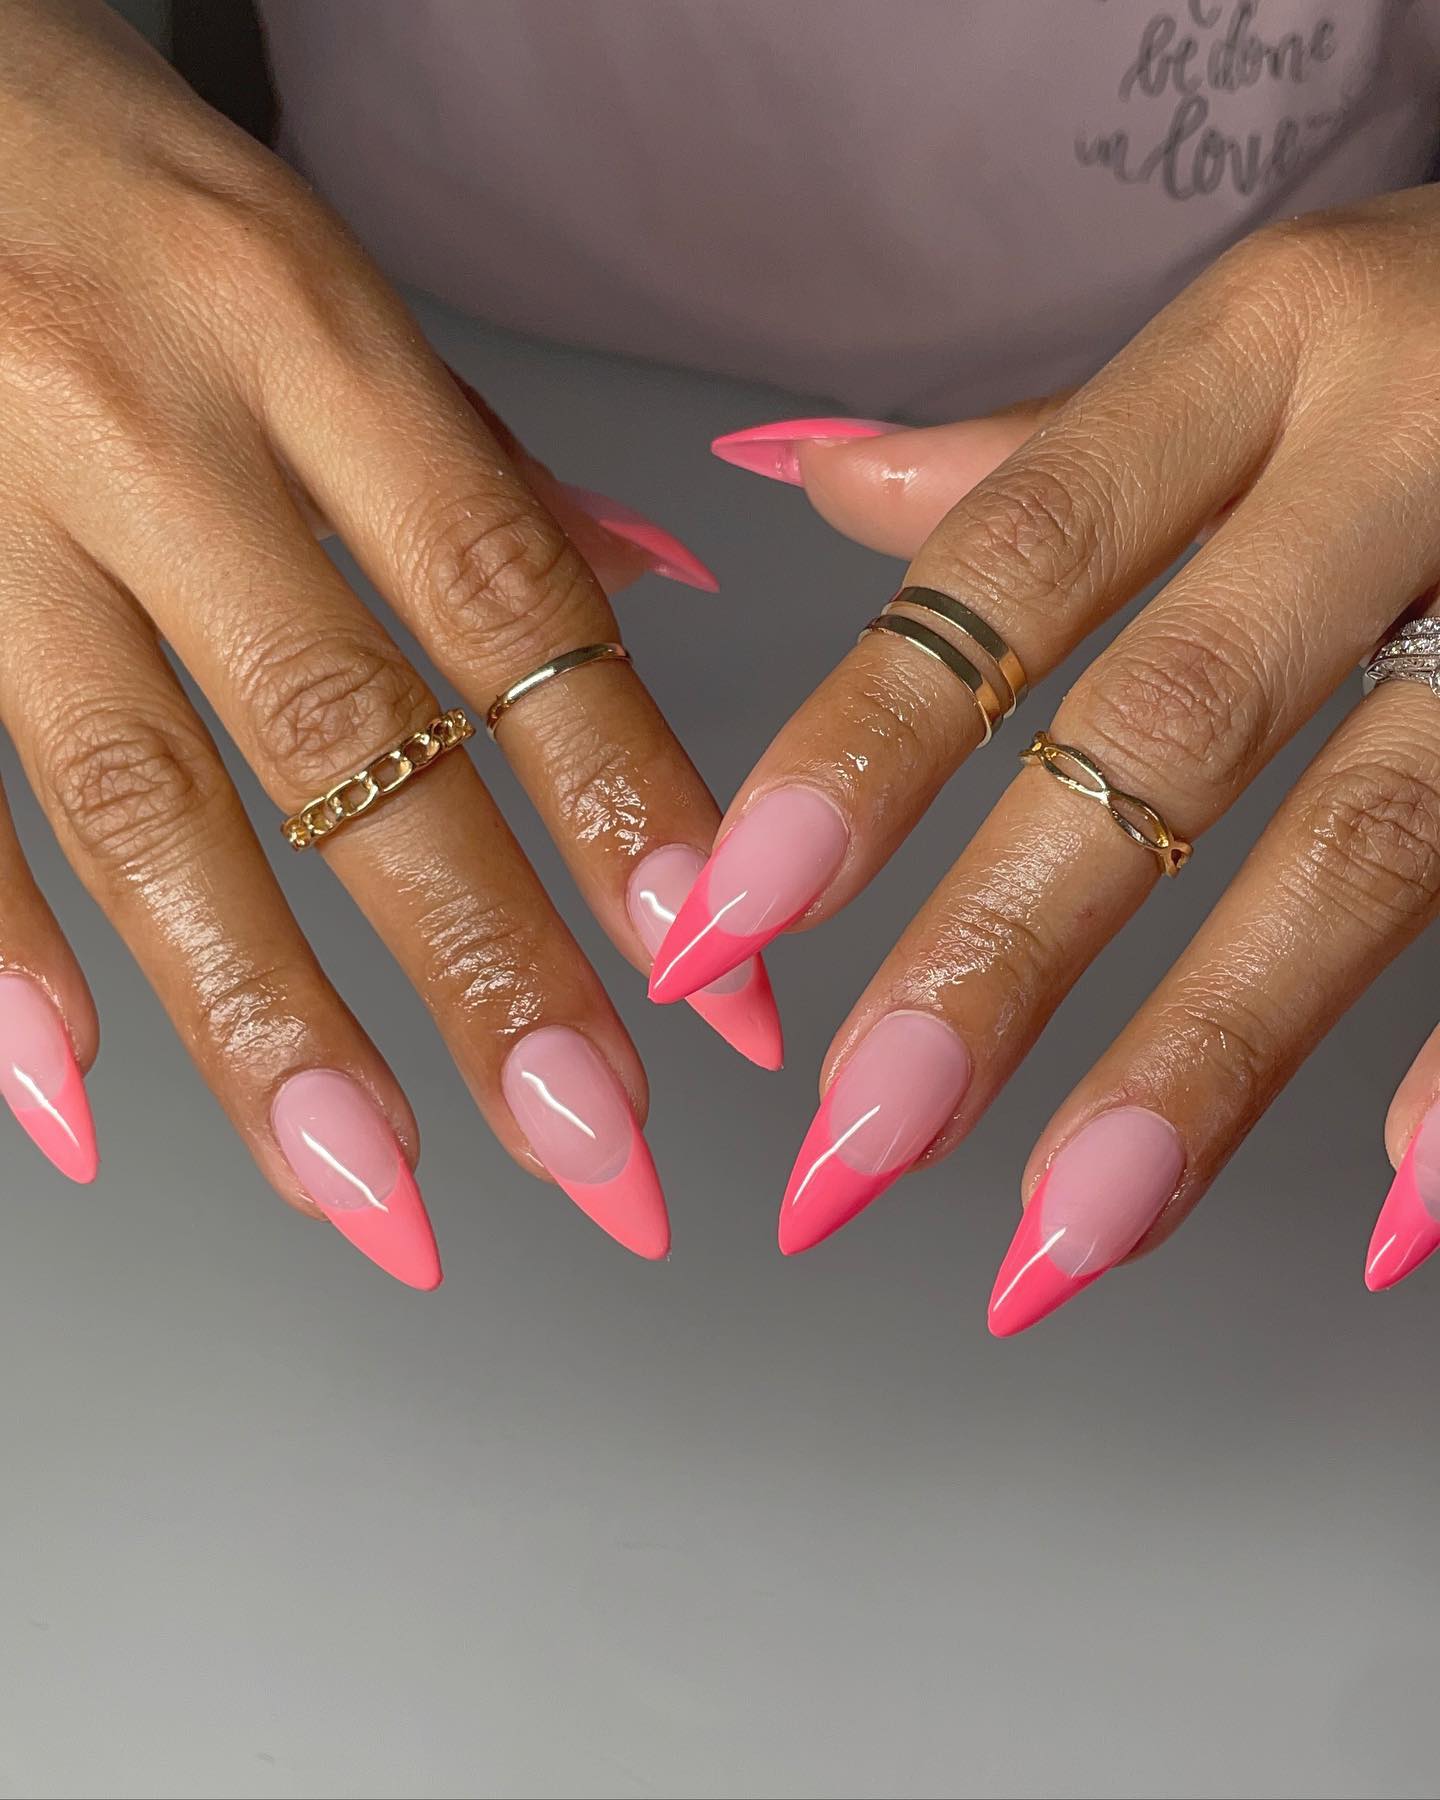 Classic oval pink manicure but with a loud undertone. This design is for party women who like to stand out.